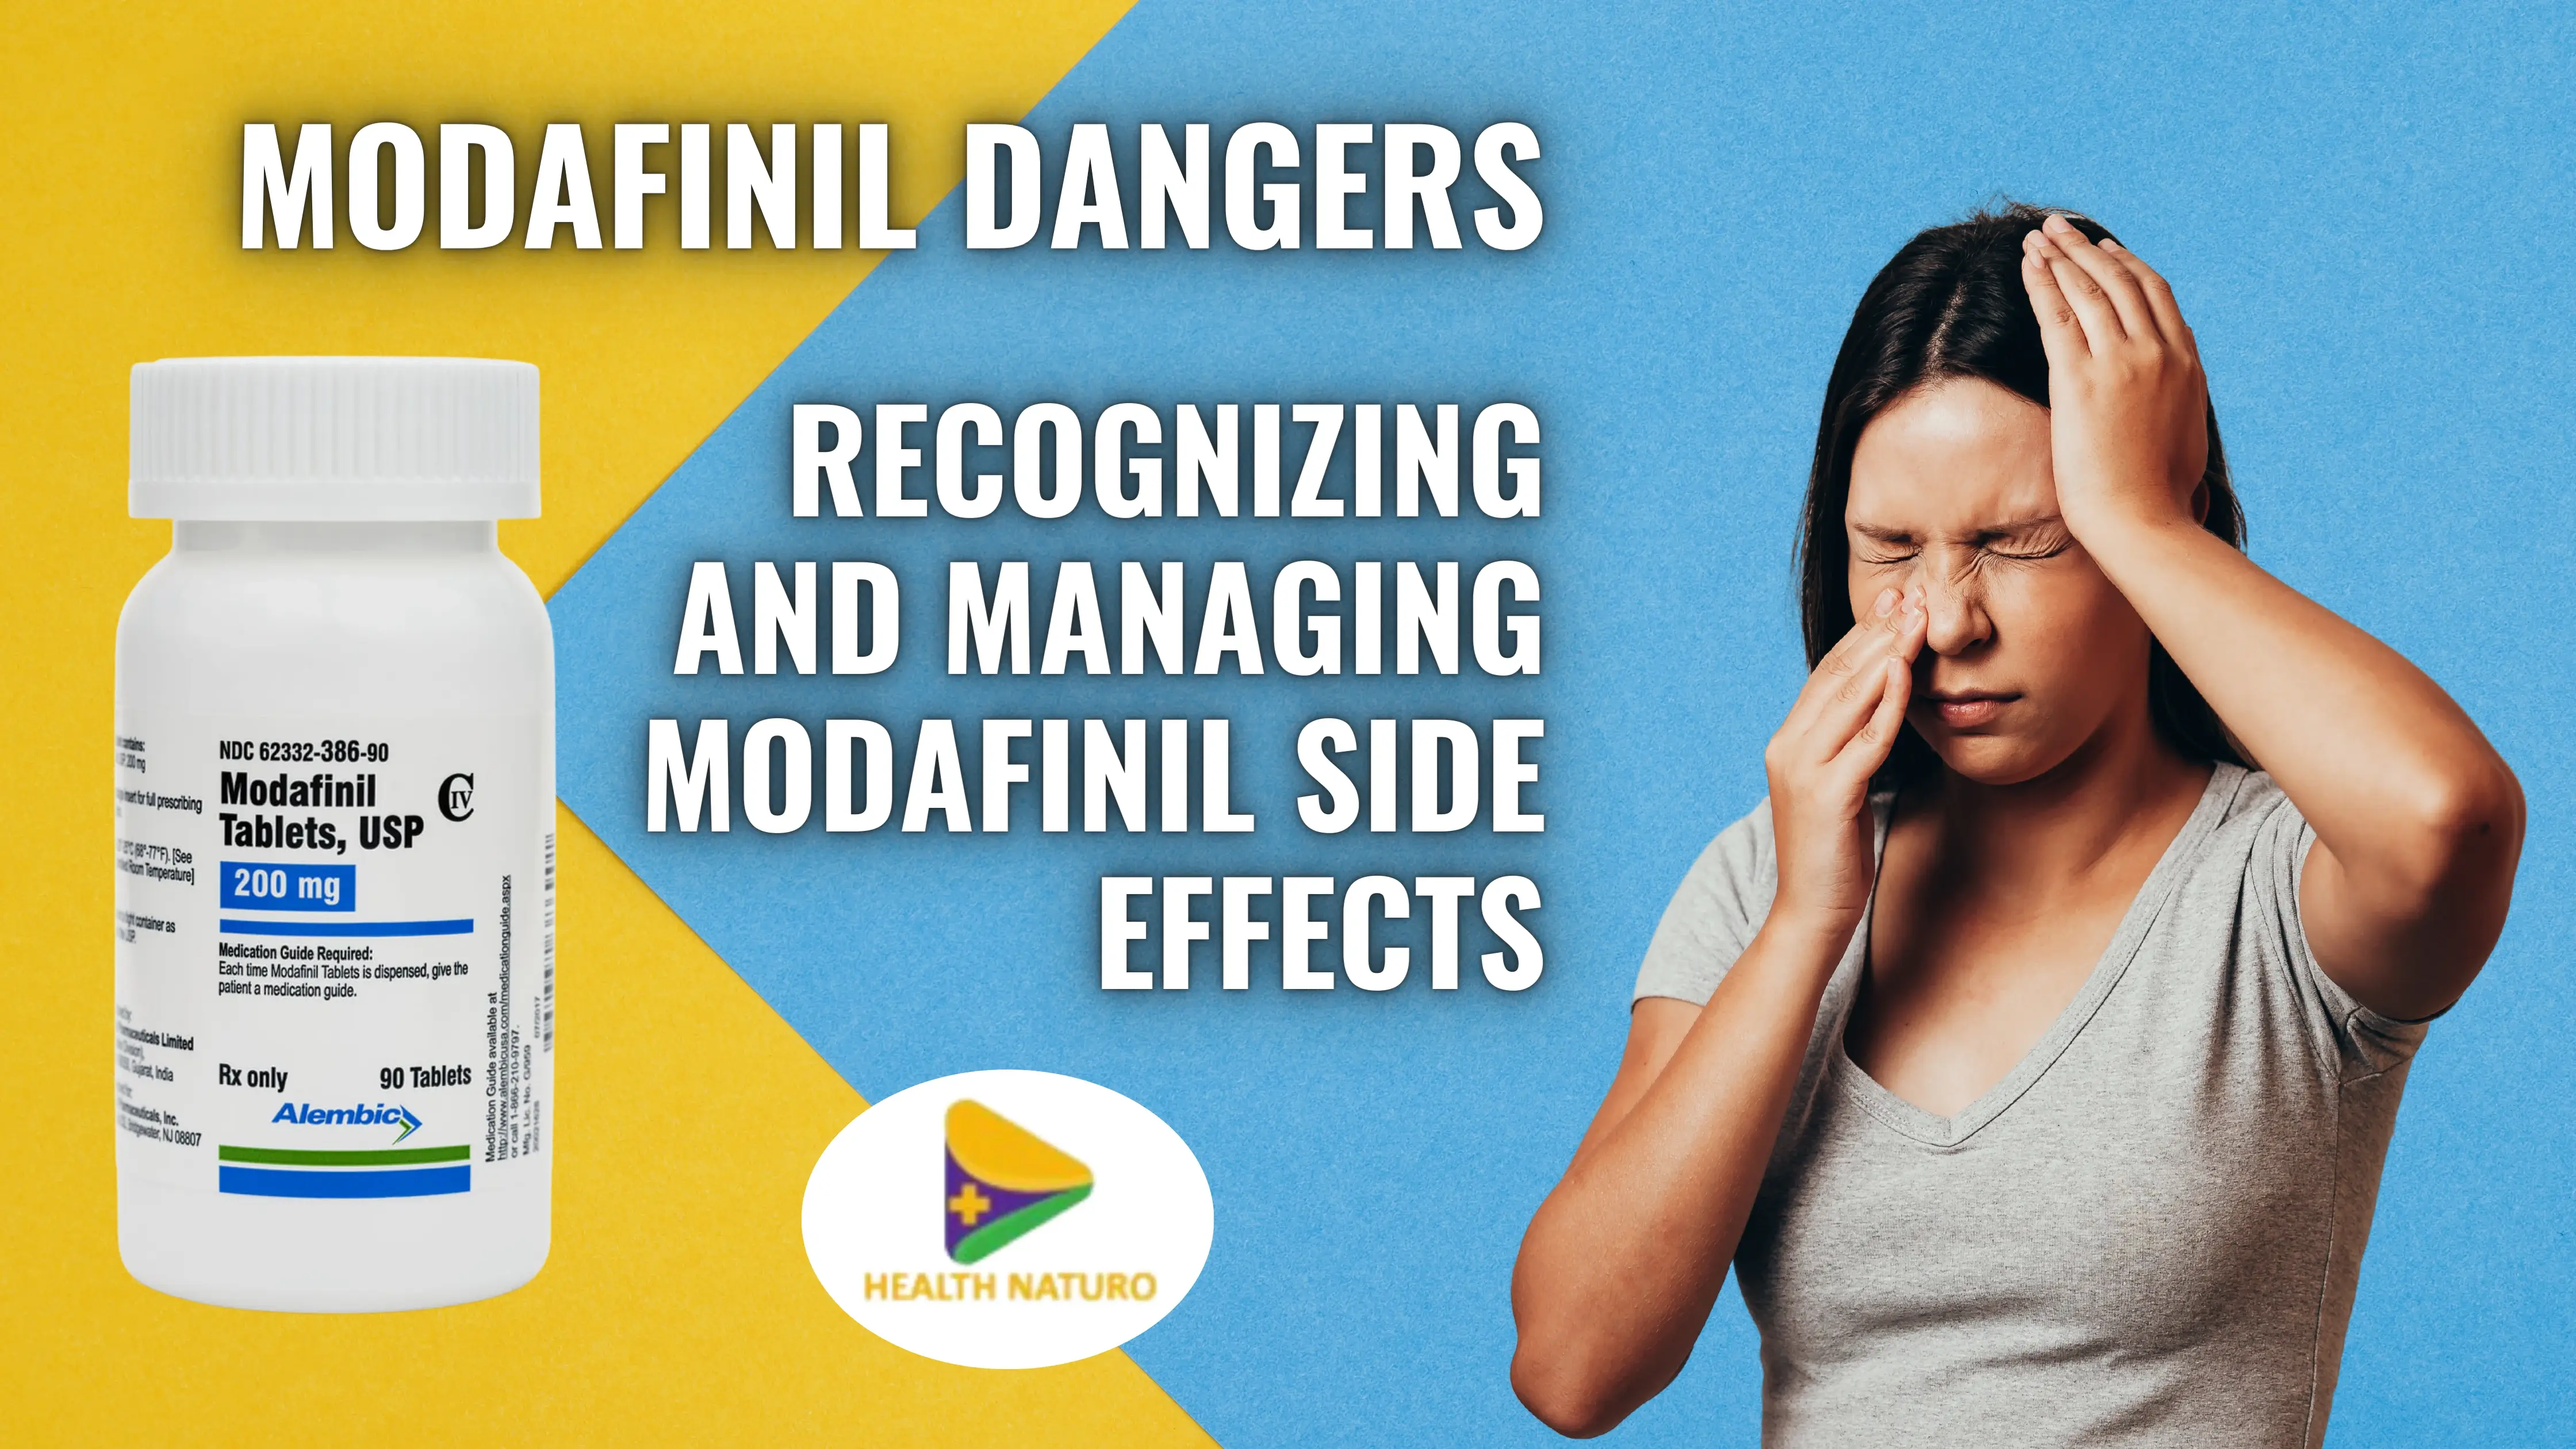 Modafinil Dangers- Recognizing And Managing Modafinil Side Effects